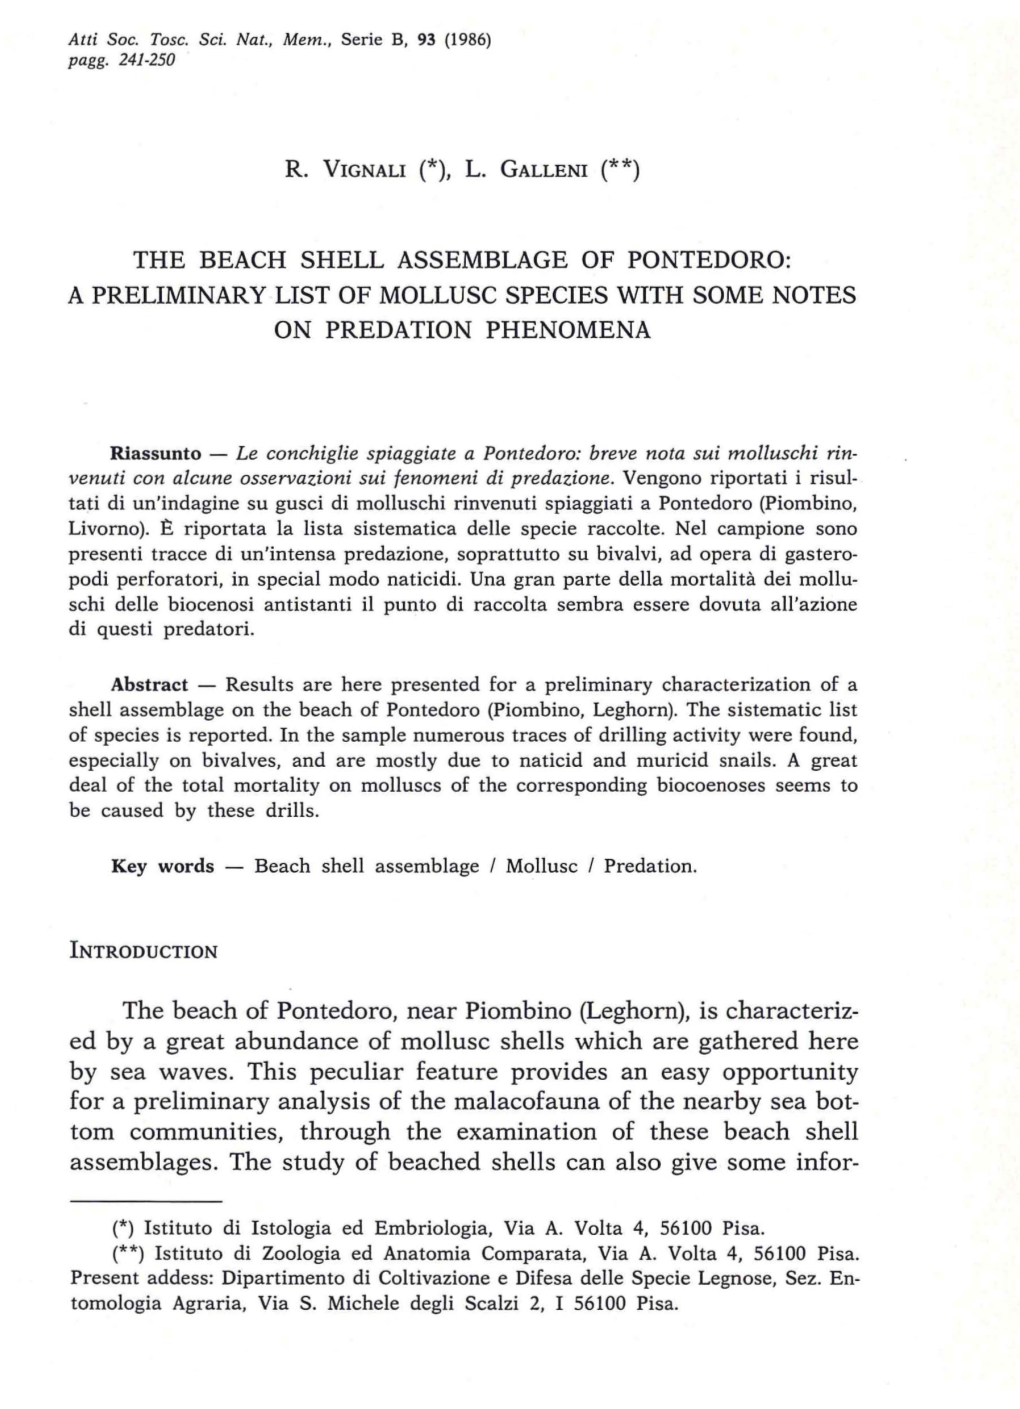 THE BEACH SHELL ASSEMBLAGE of PONTEDORO: a PRELIMINARY LIST of MOLLUSC SPECIES with SOME NOTES on PREDATION PHENOMENA the Beach